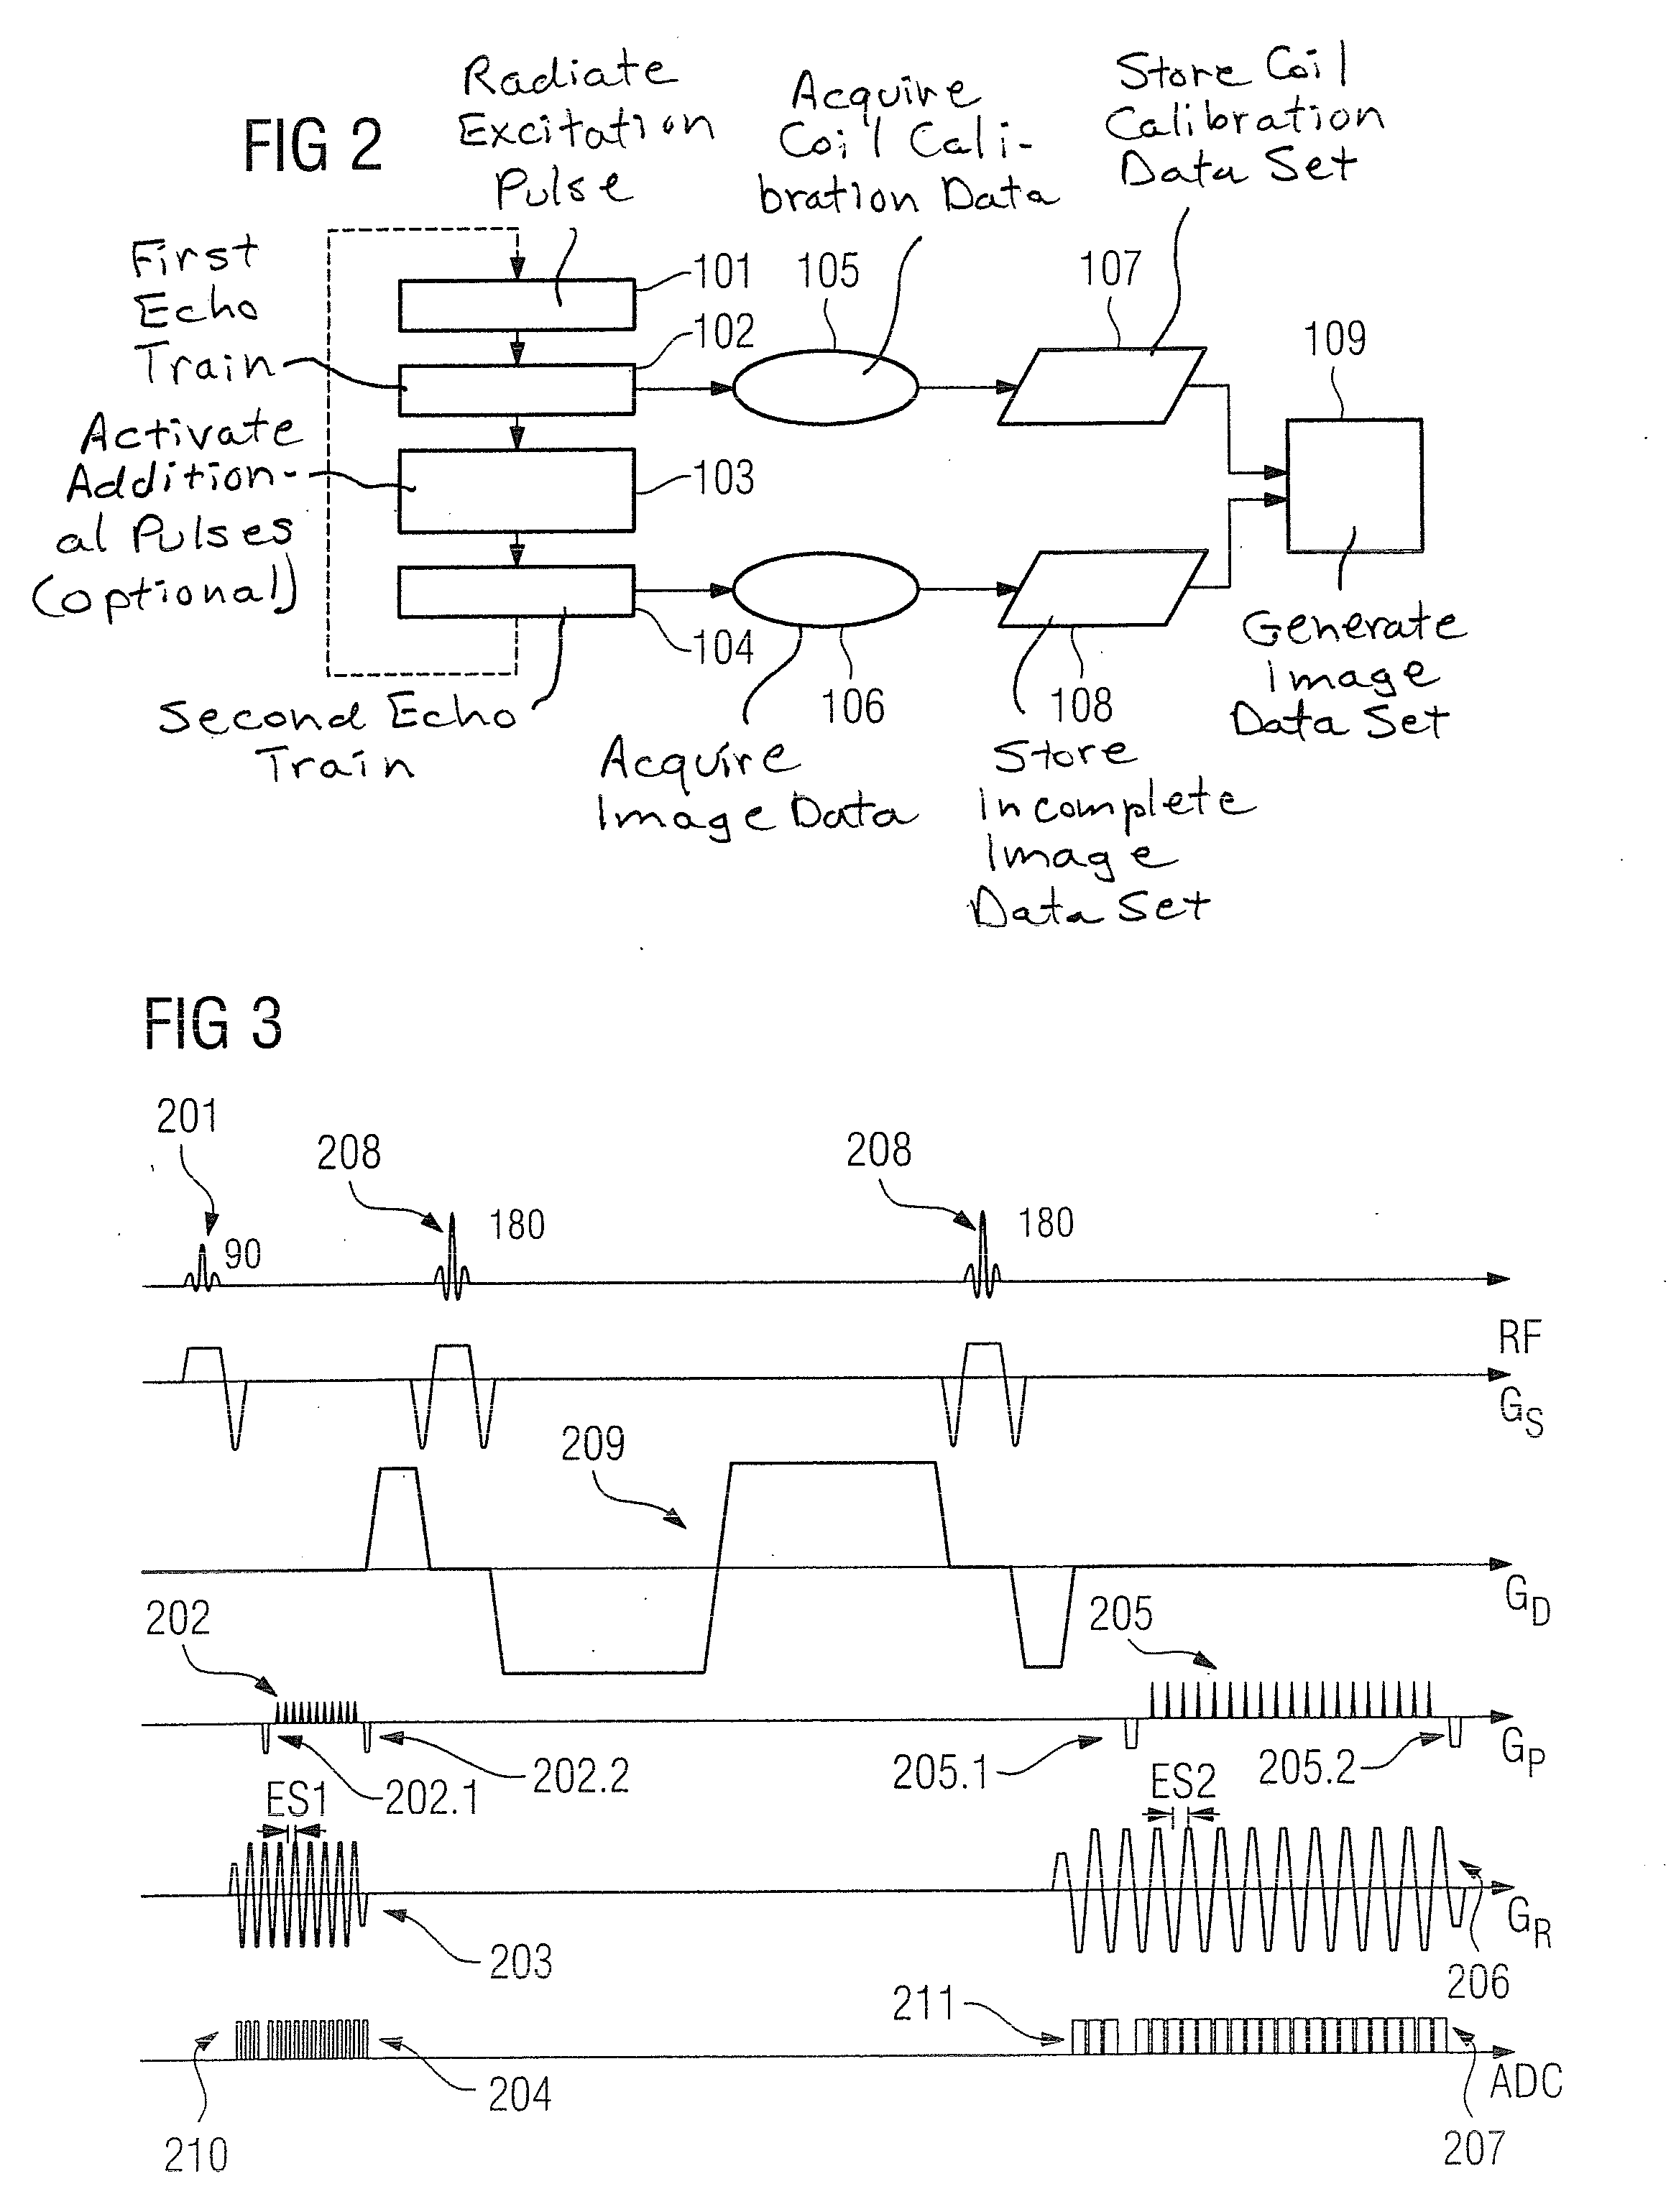 Magnetic resonance method and apparatus to generate an image using a parallel acquisition technique